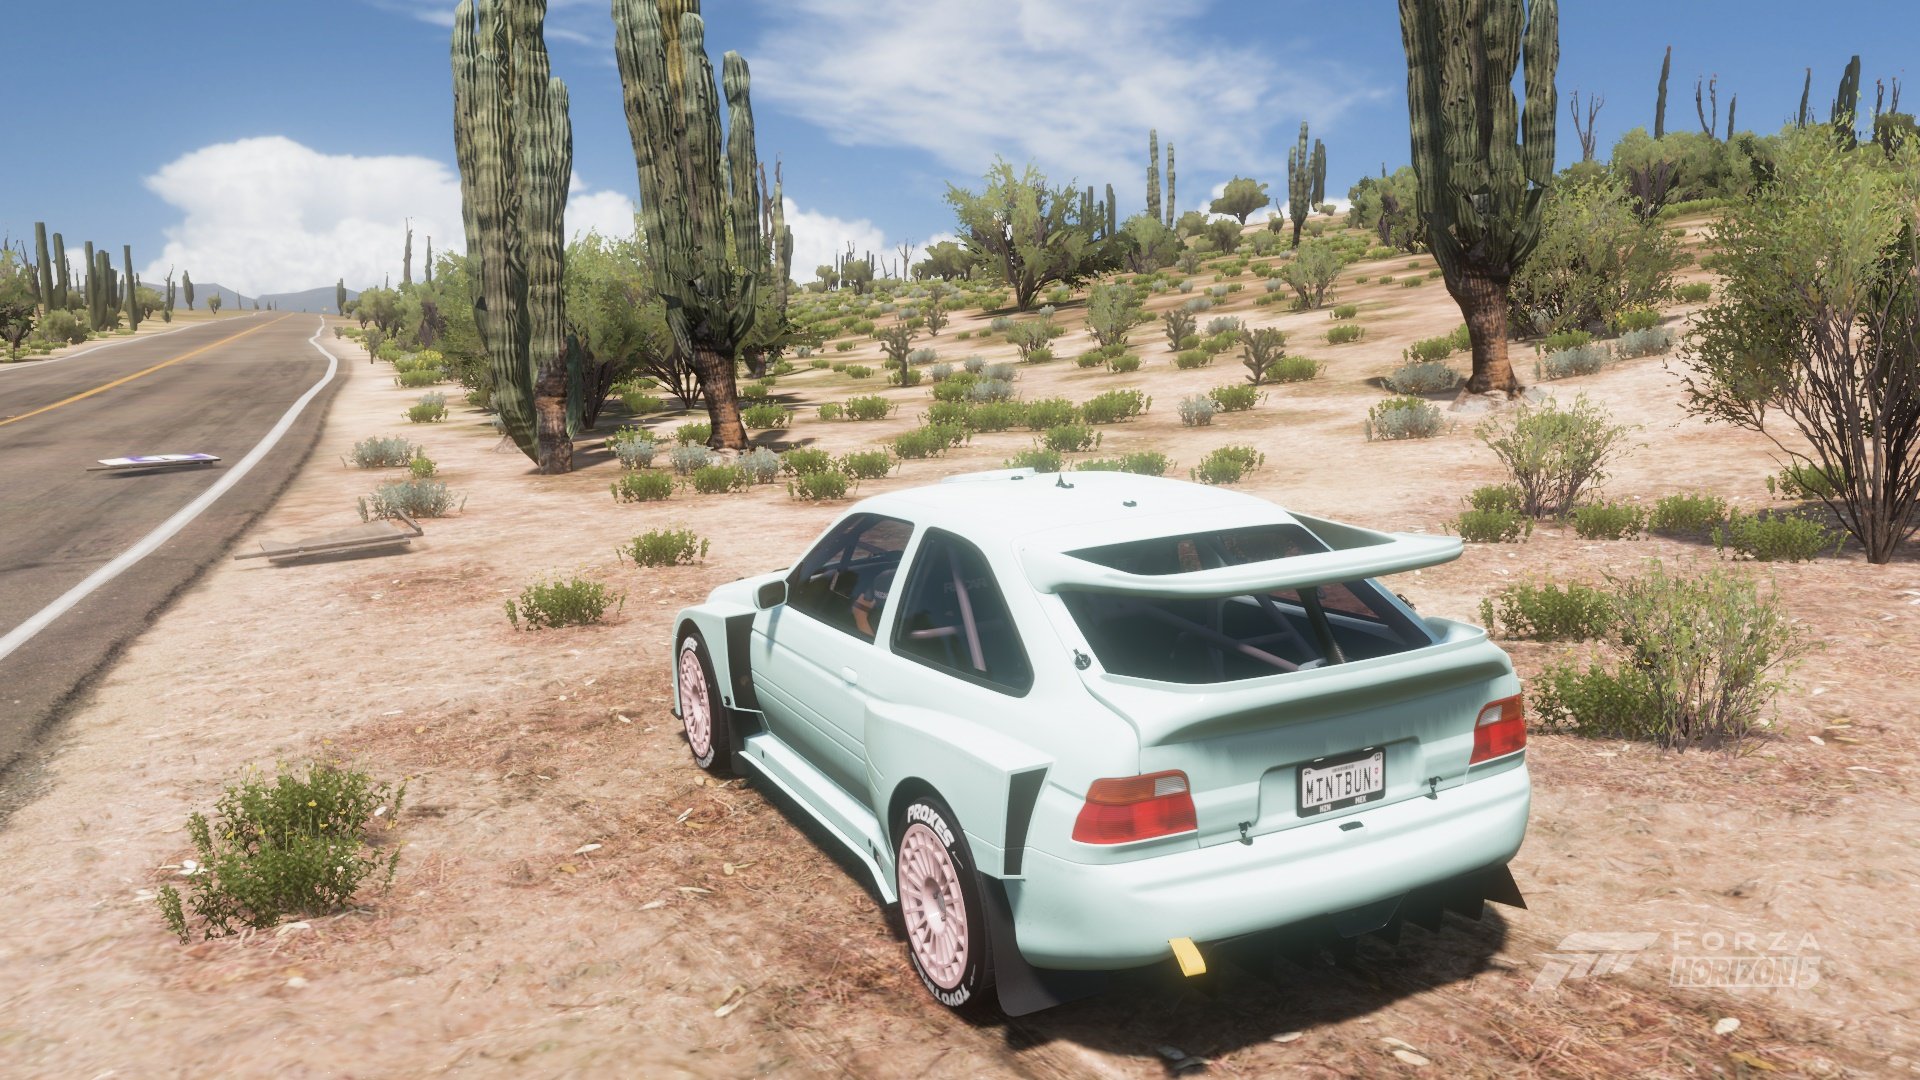 My mint car parked in front of a cactus.